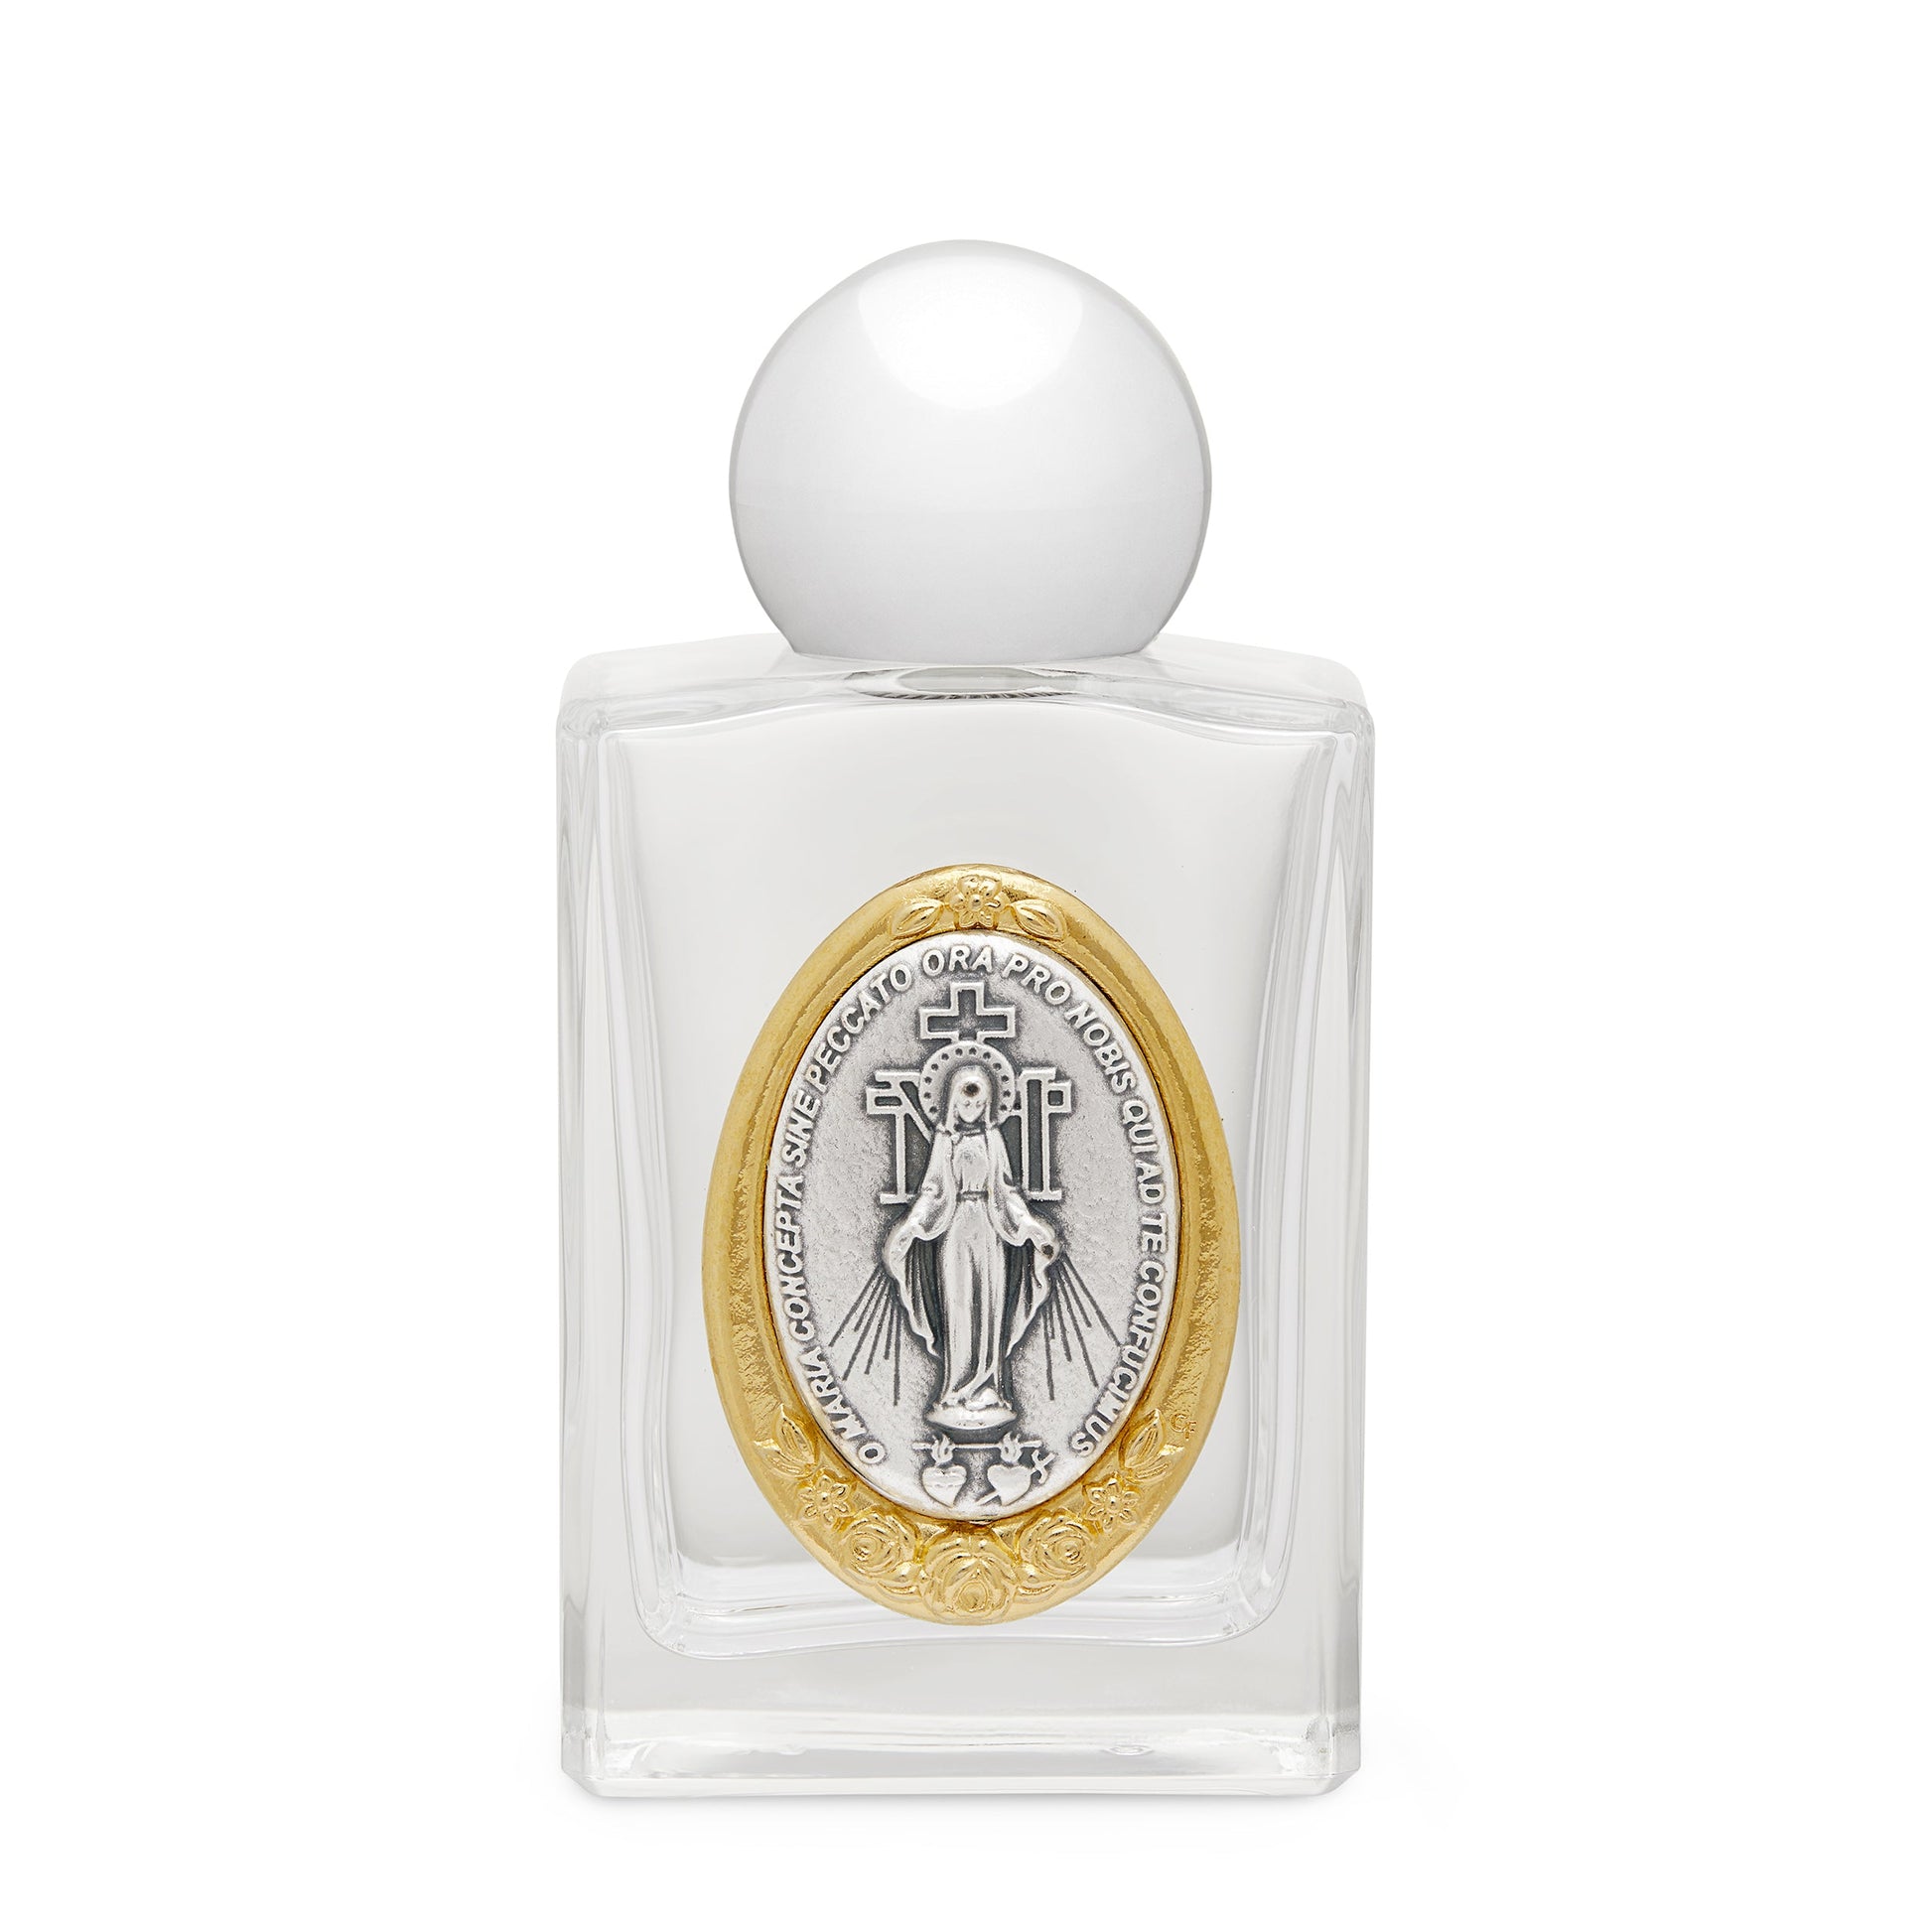 MONDO CATTOLICO Bottle of 50 ml. with The Miraculous Virgin